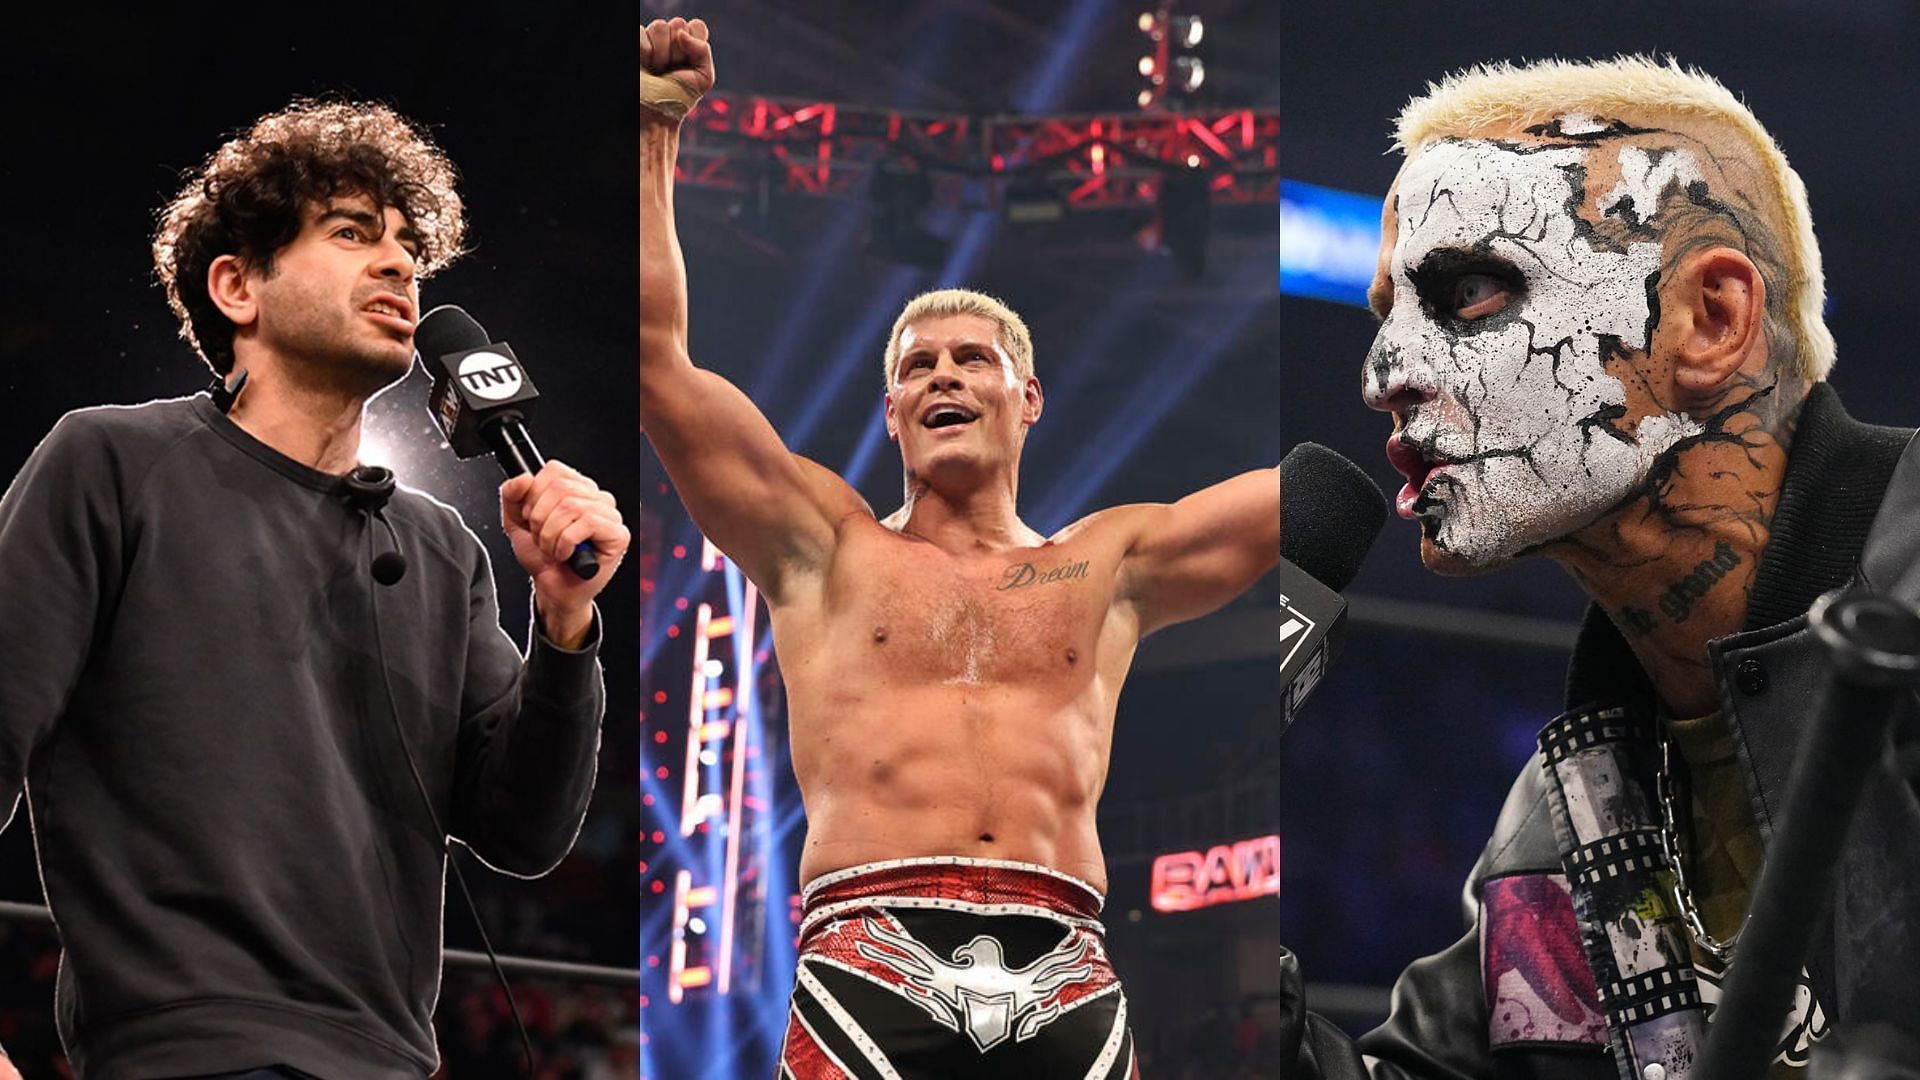 Darby Allin recently referenced Cody Rhodes on AEW Dynamite [Photos courtesy of AEW and WWE